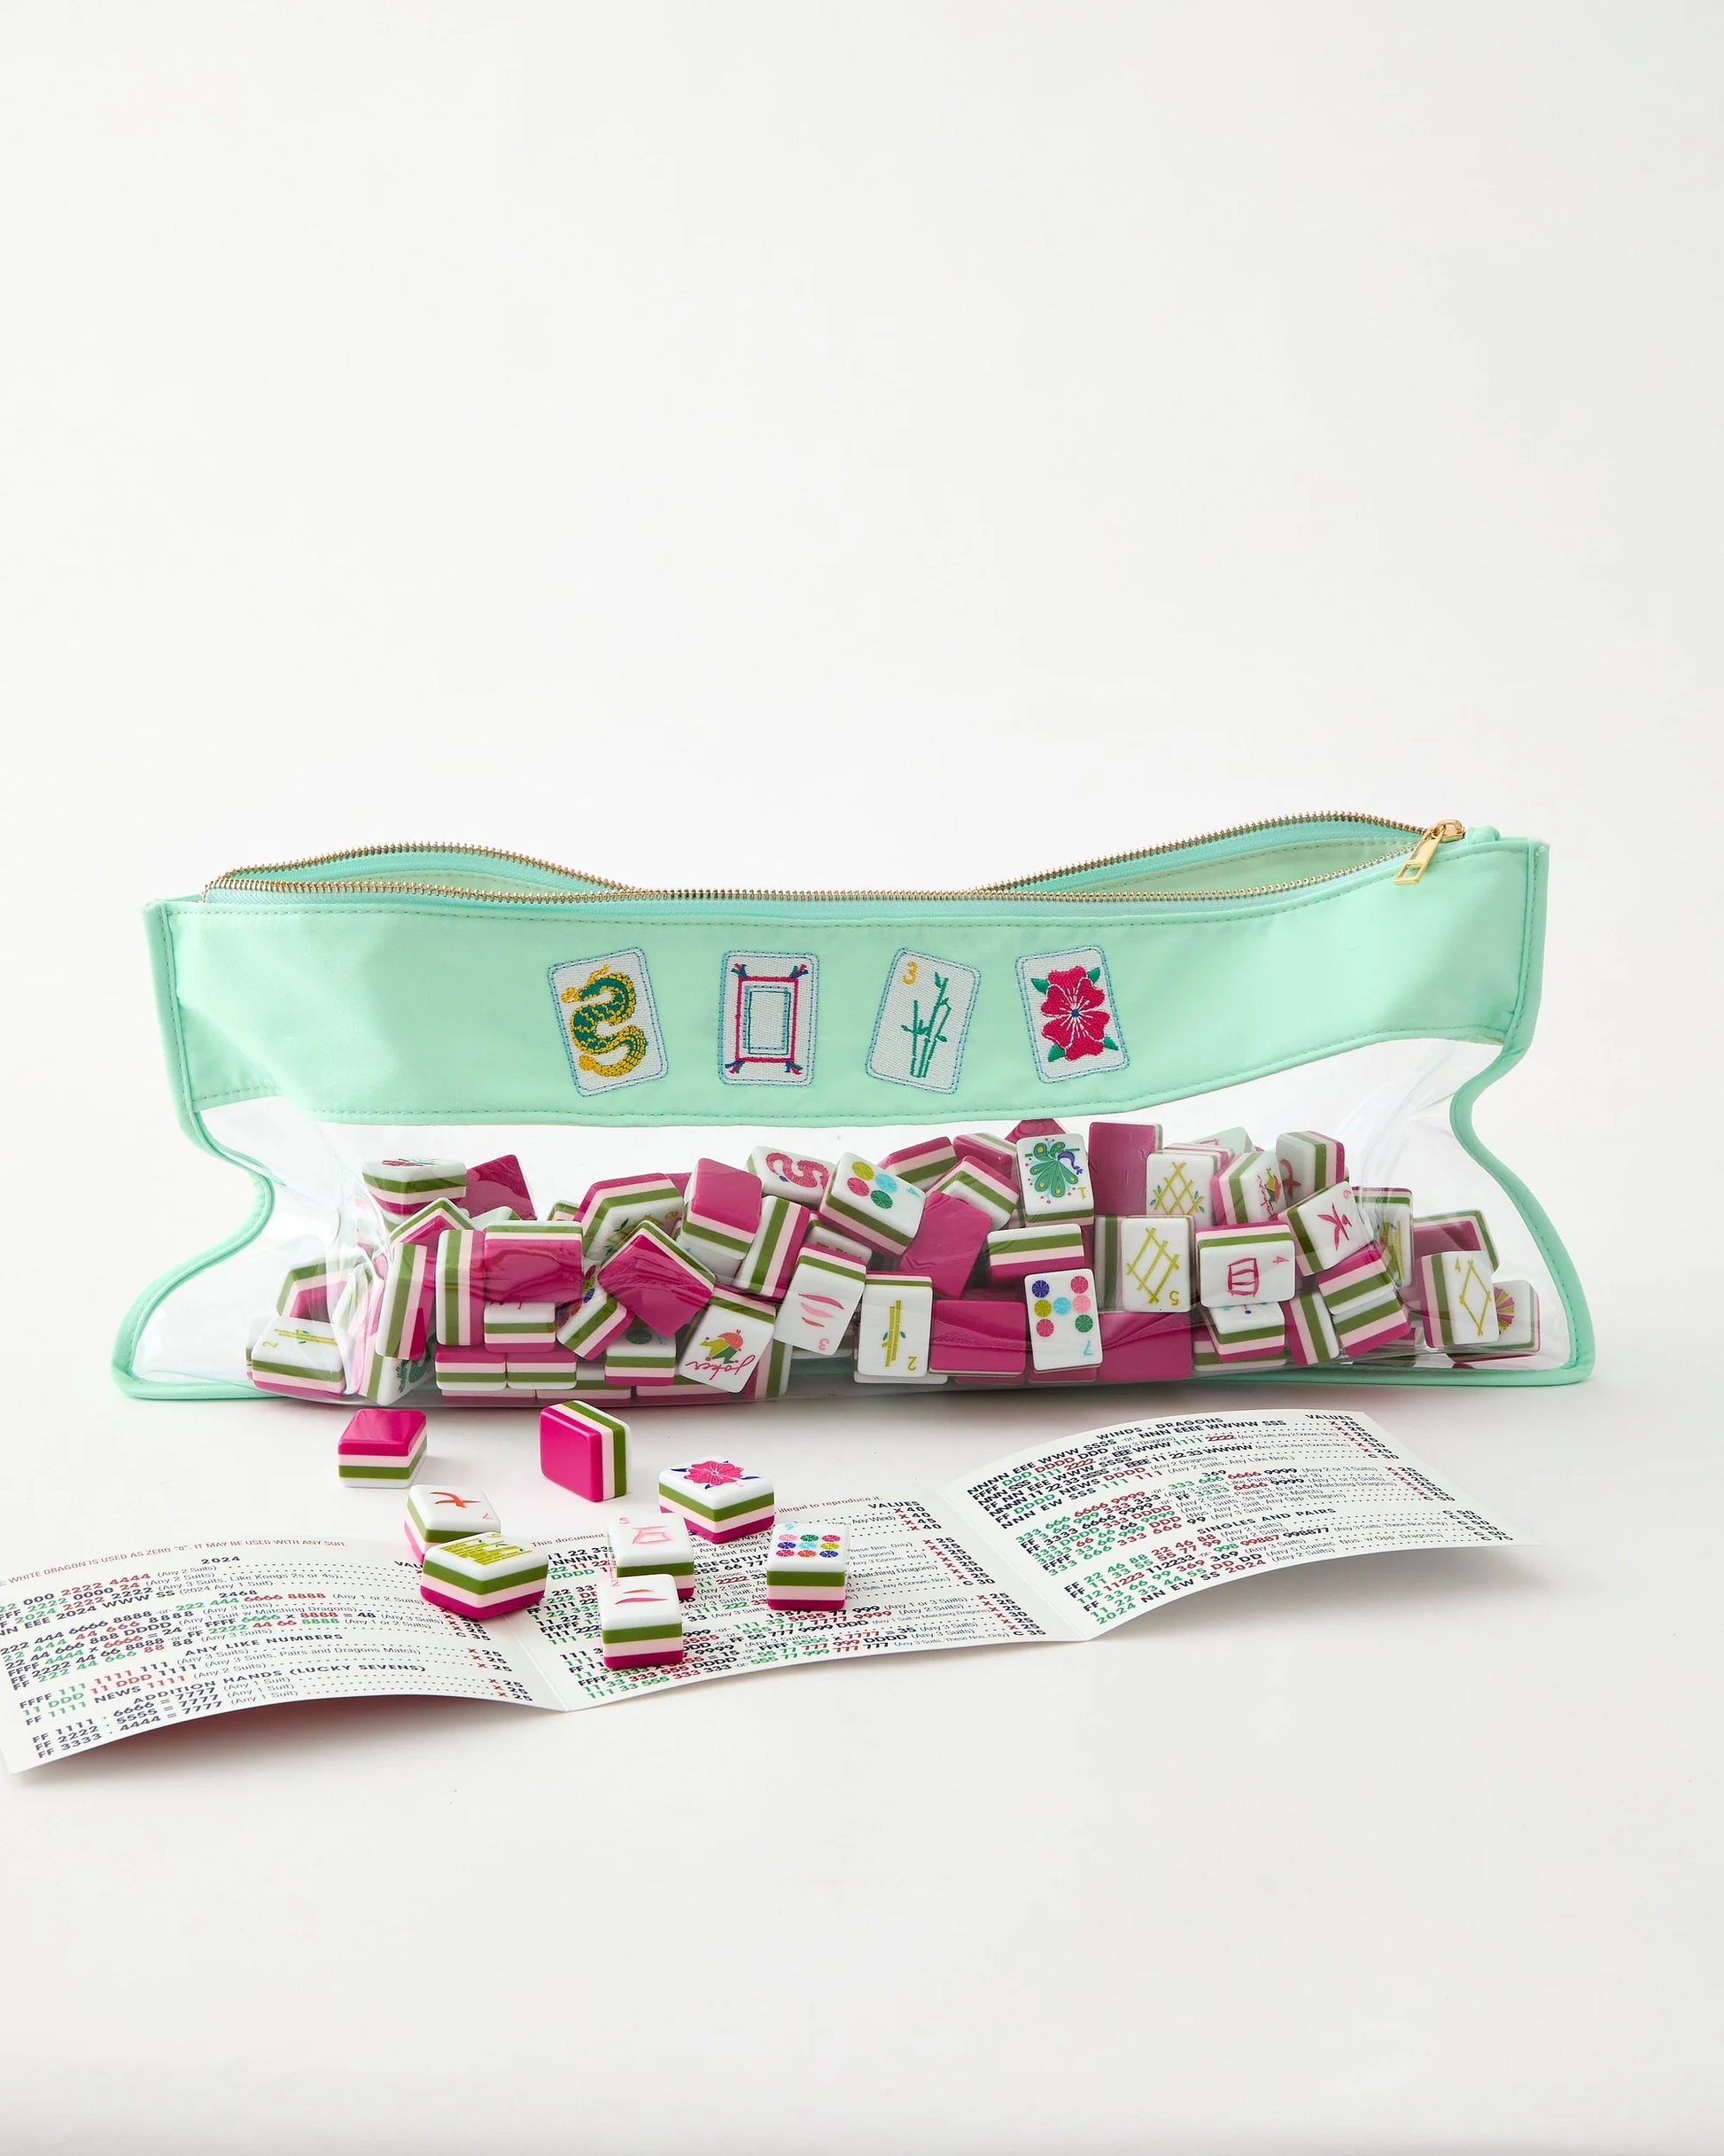 Dandy mahjong tile set by oh my mahjong in zippered pouch